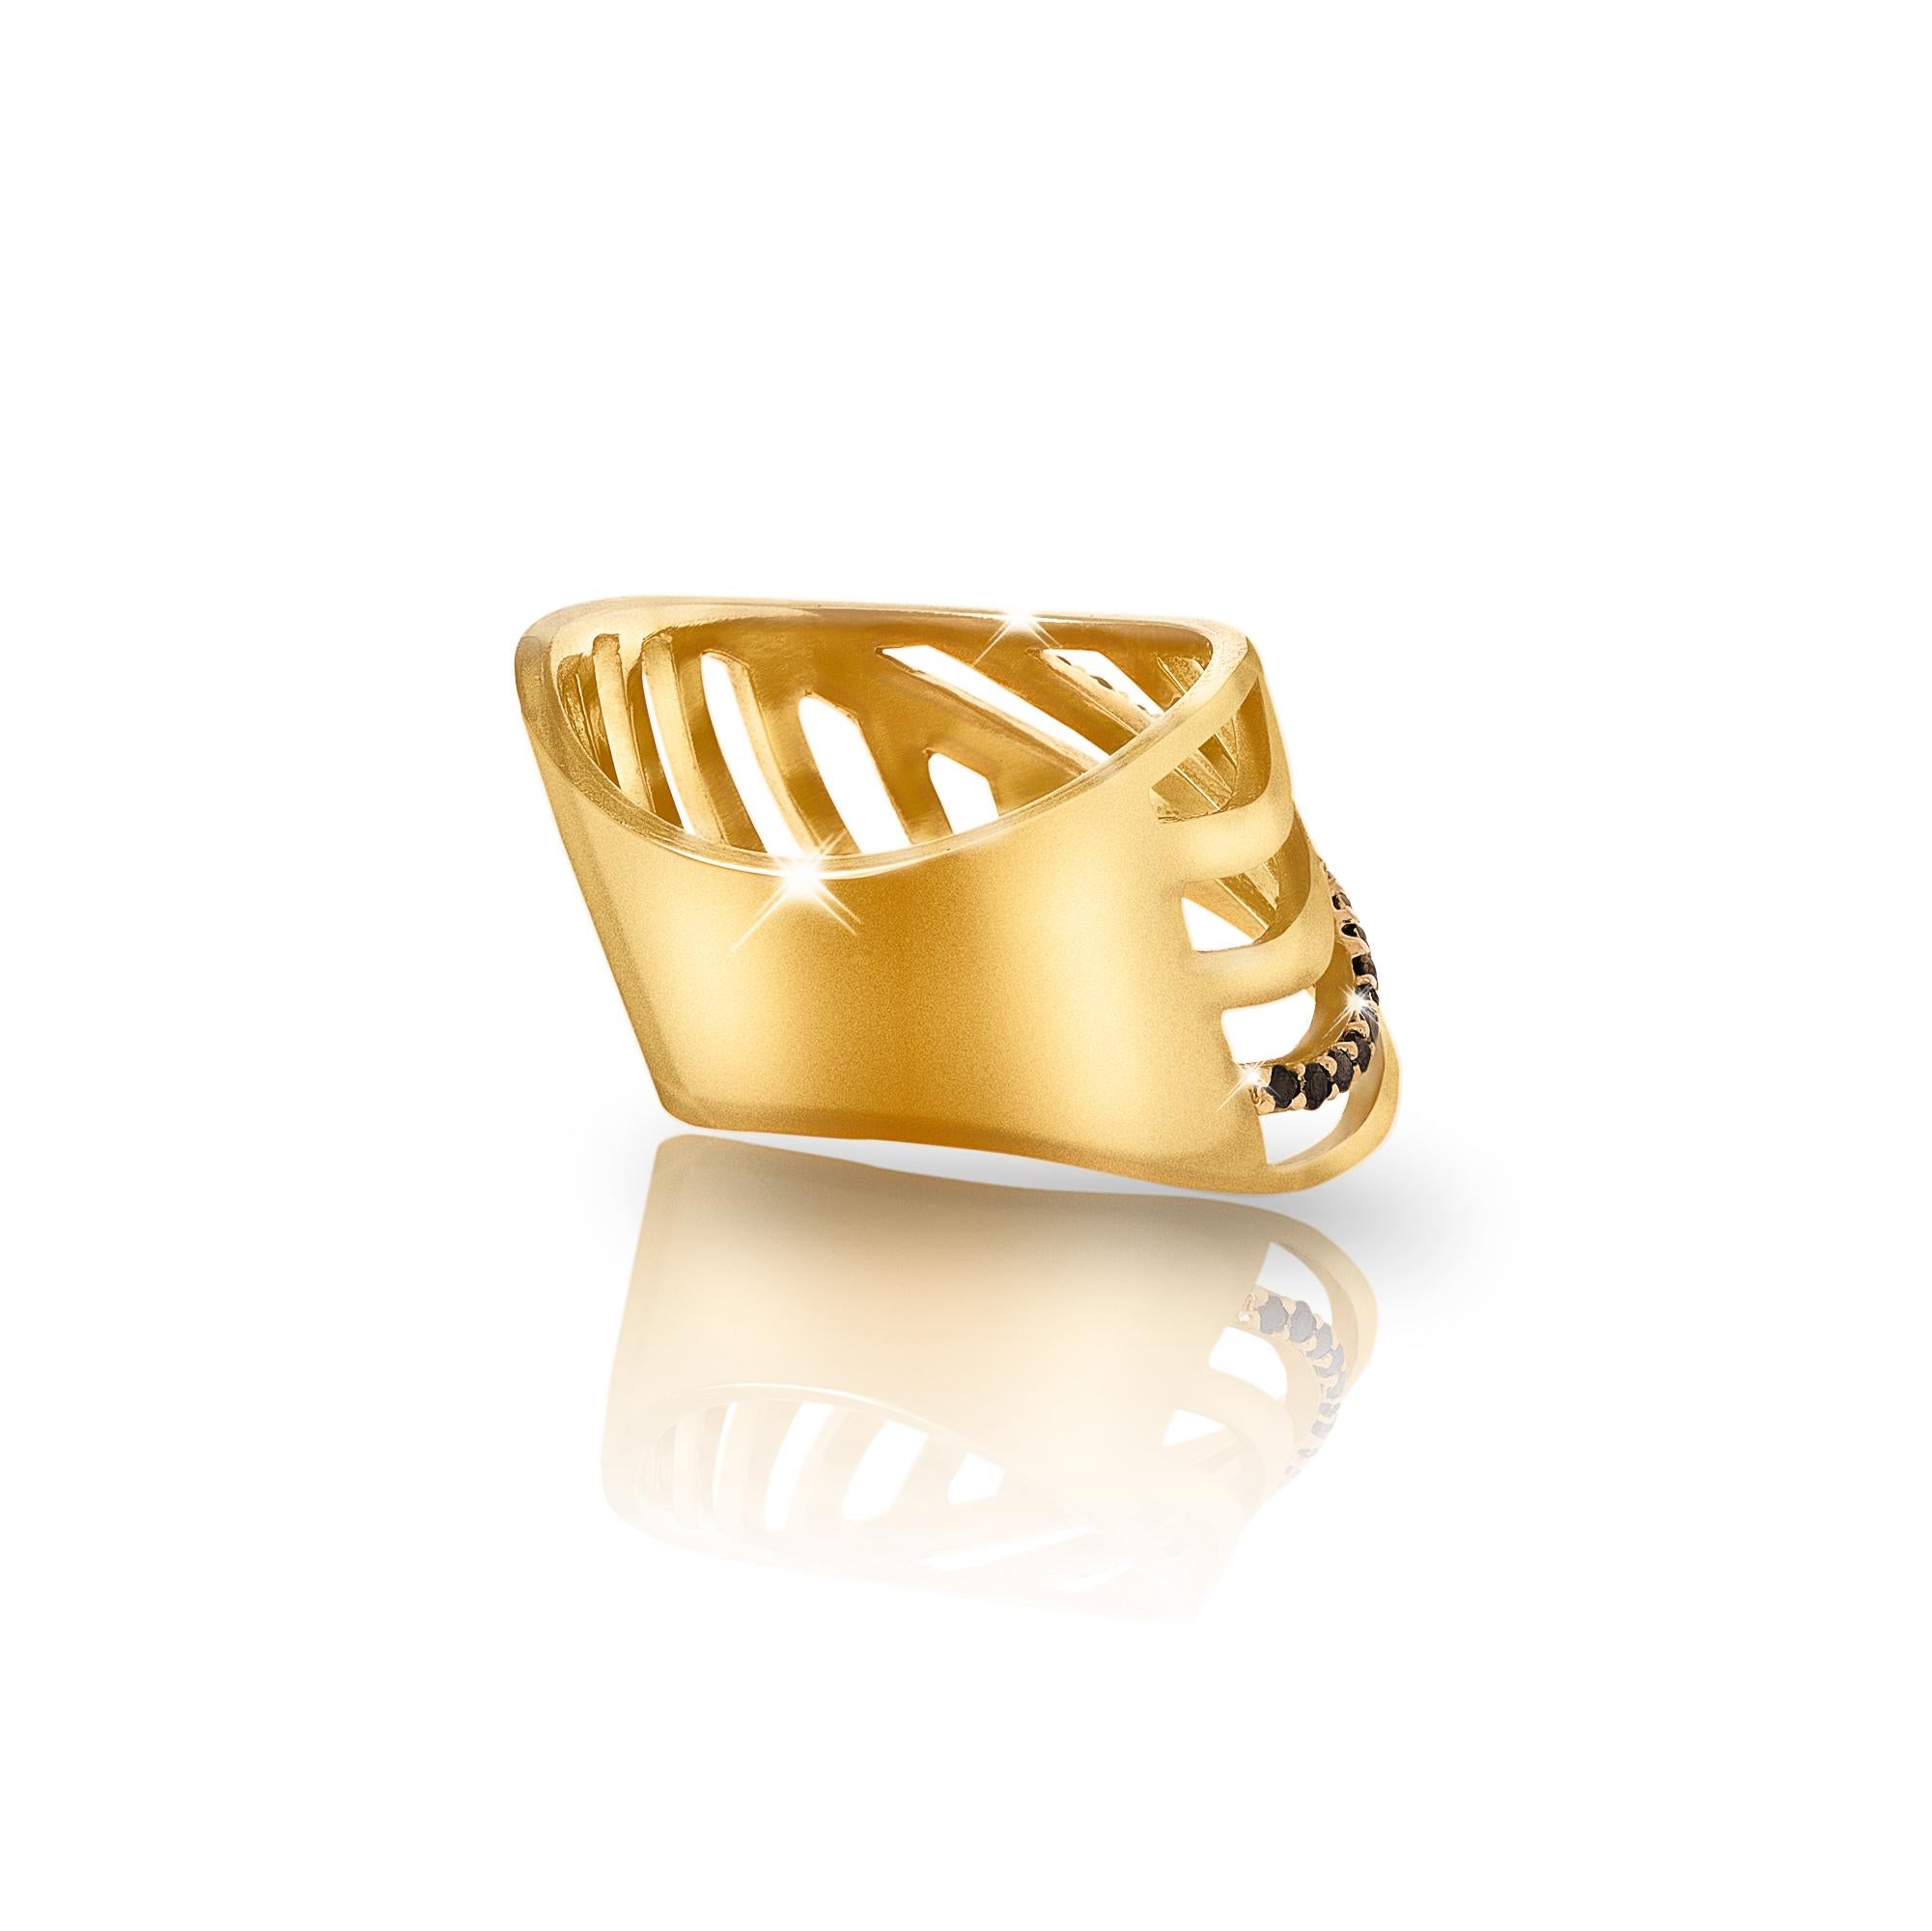 Unisex band ring in 18k yellow gold vermeil, set with black diamonds pave. Perfect worn solo or horizontally stacked with multiple rings from the collection. This unique piece has cut-outs in an abstract fishbone pattern.
Materials: 18k yellow gold